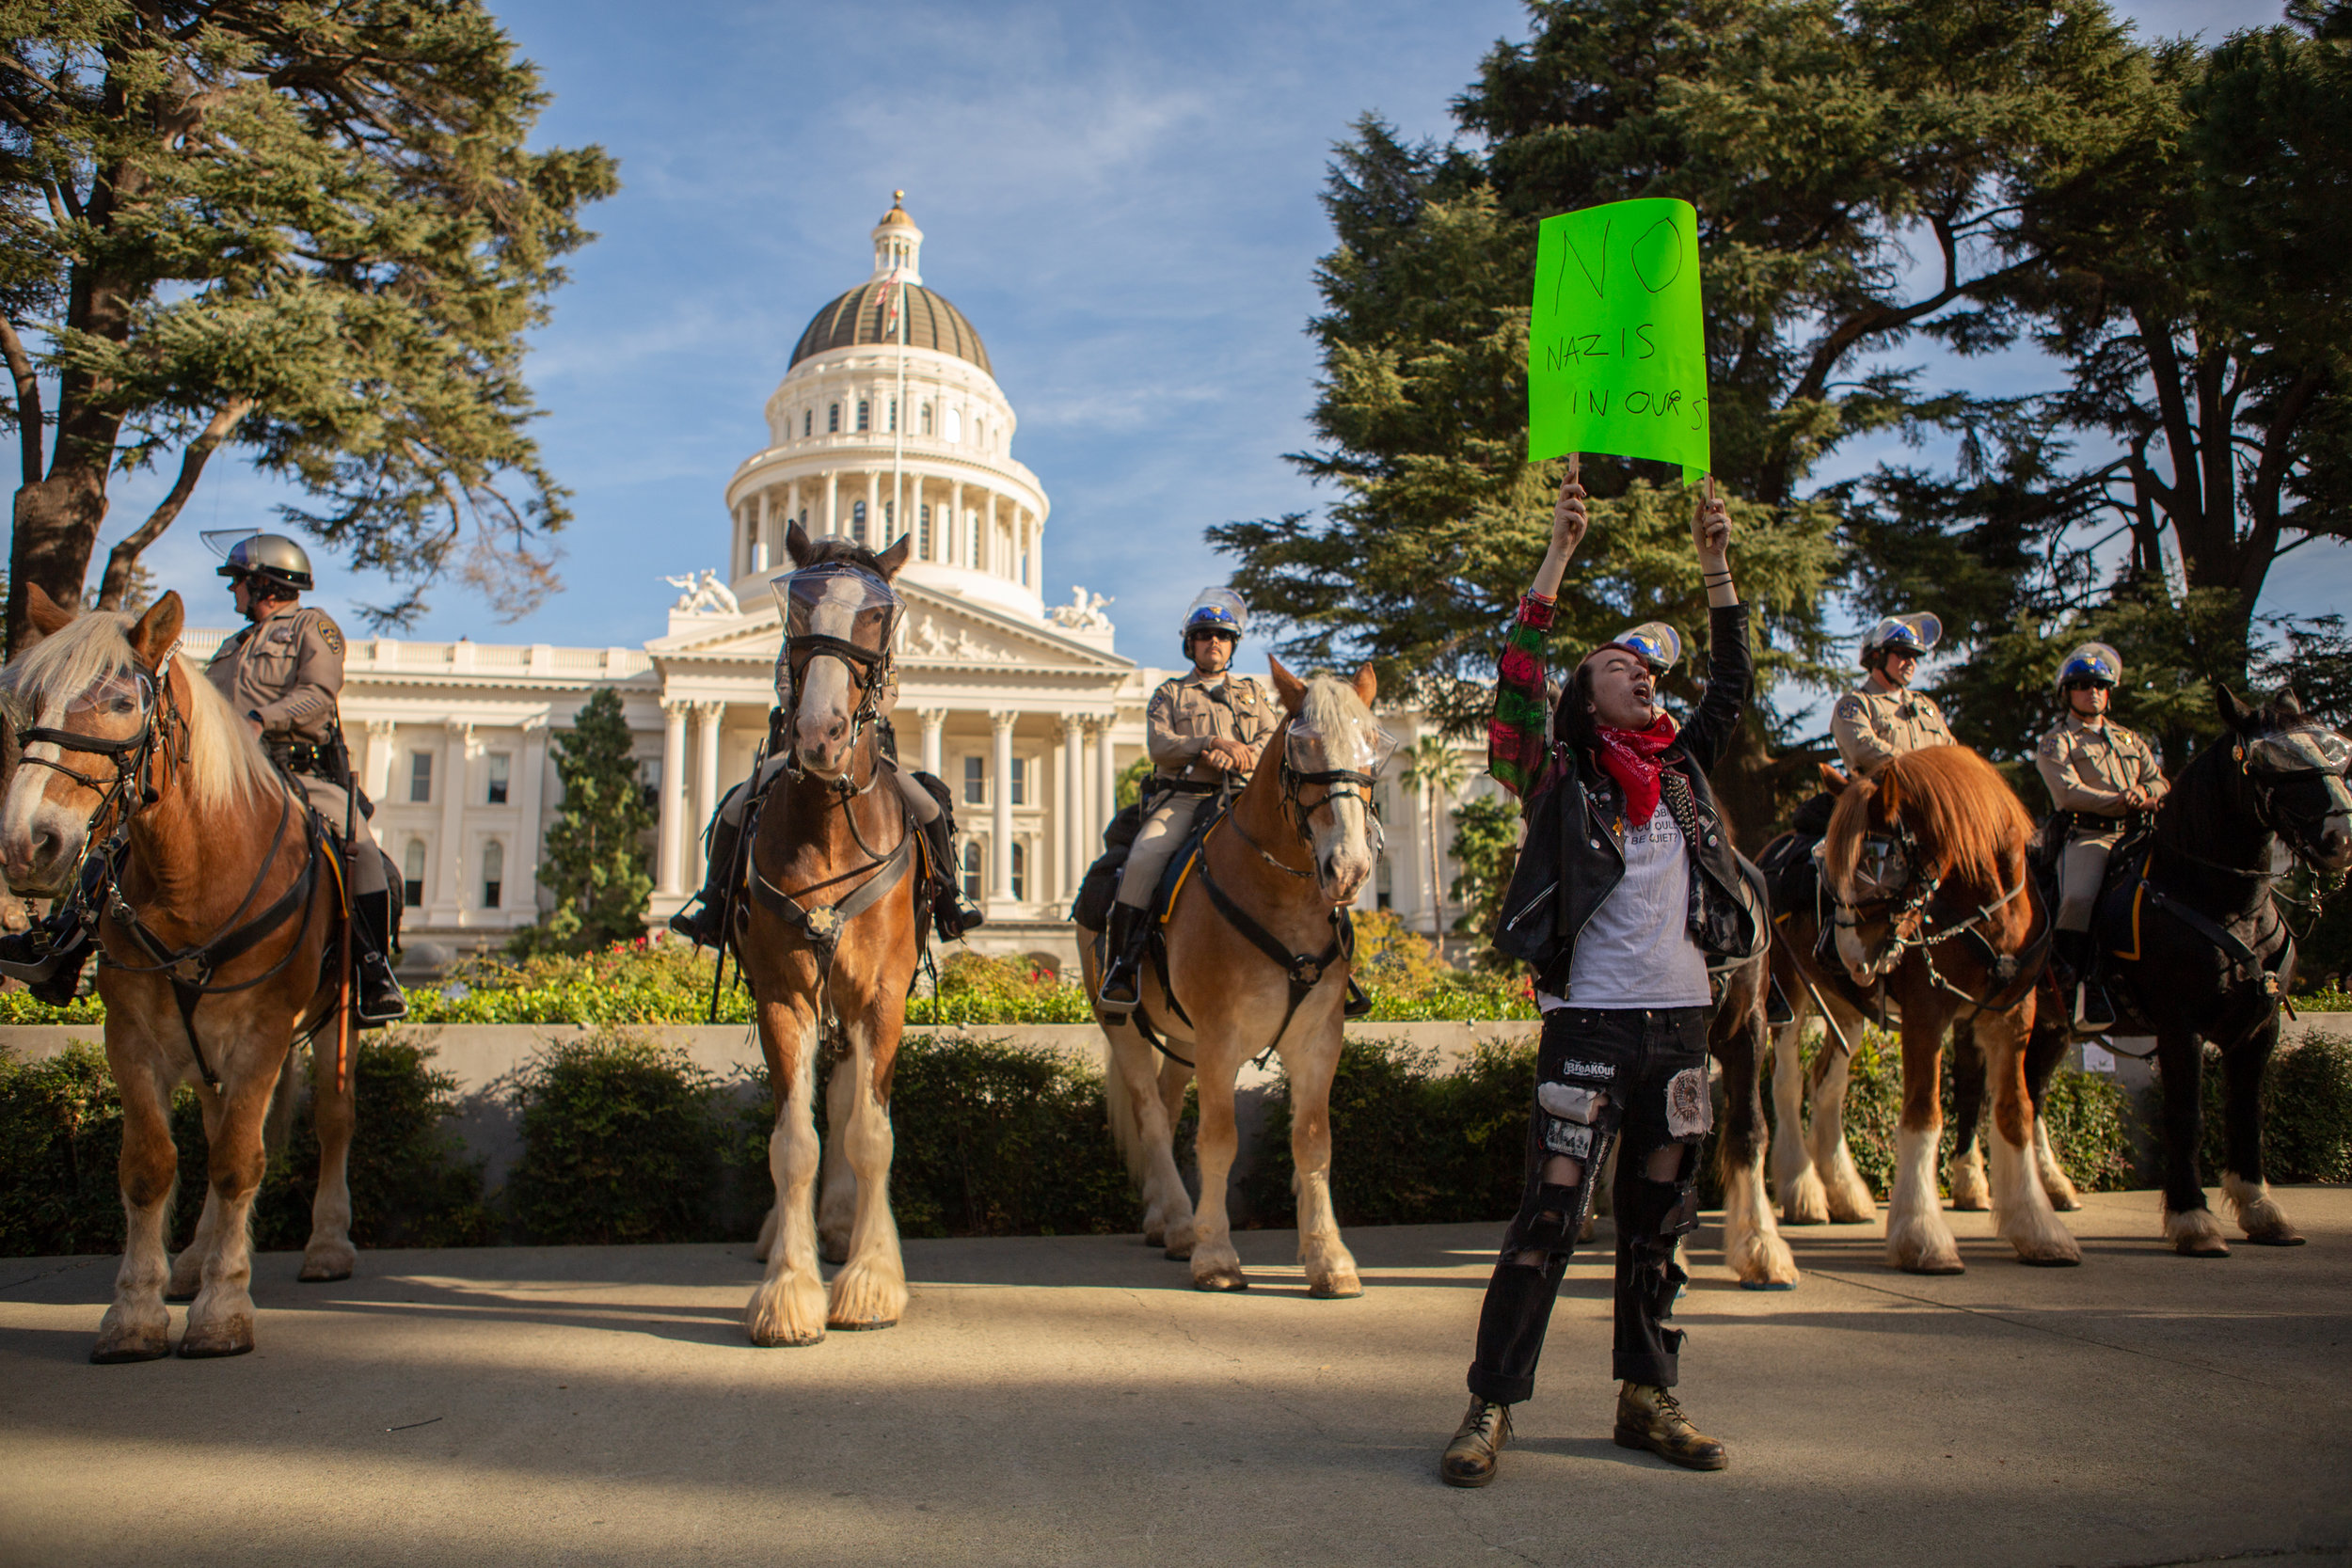  California conservatives assembled outside the steps of the state Capitol at 1pm in Sacramento, CA on November 4th to drum up support leading up to the November midterm elections. The demonstration had the required permits and remained largely fence